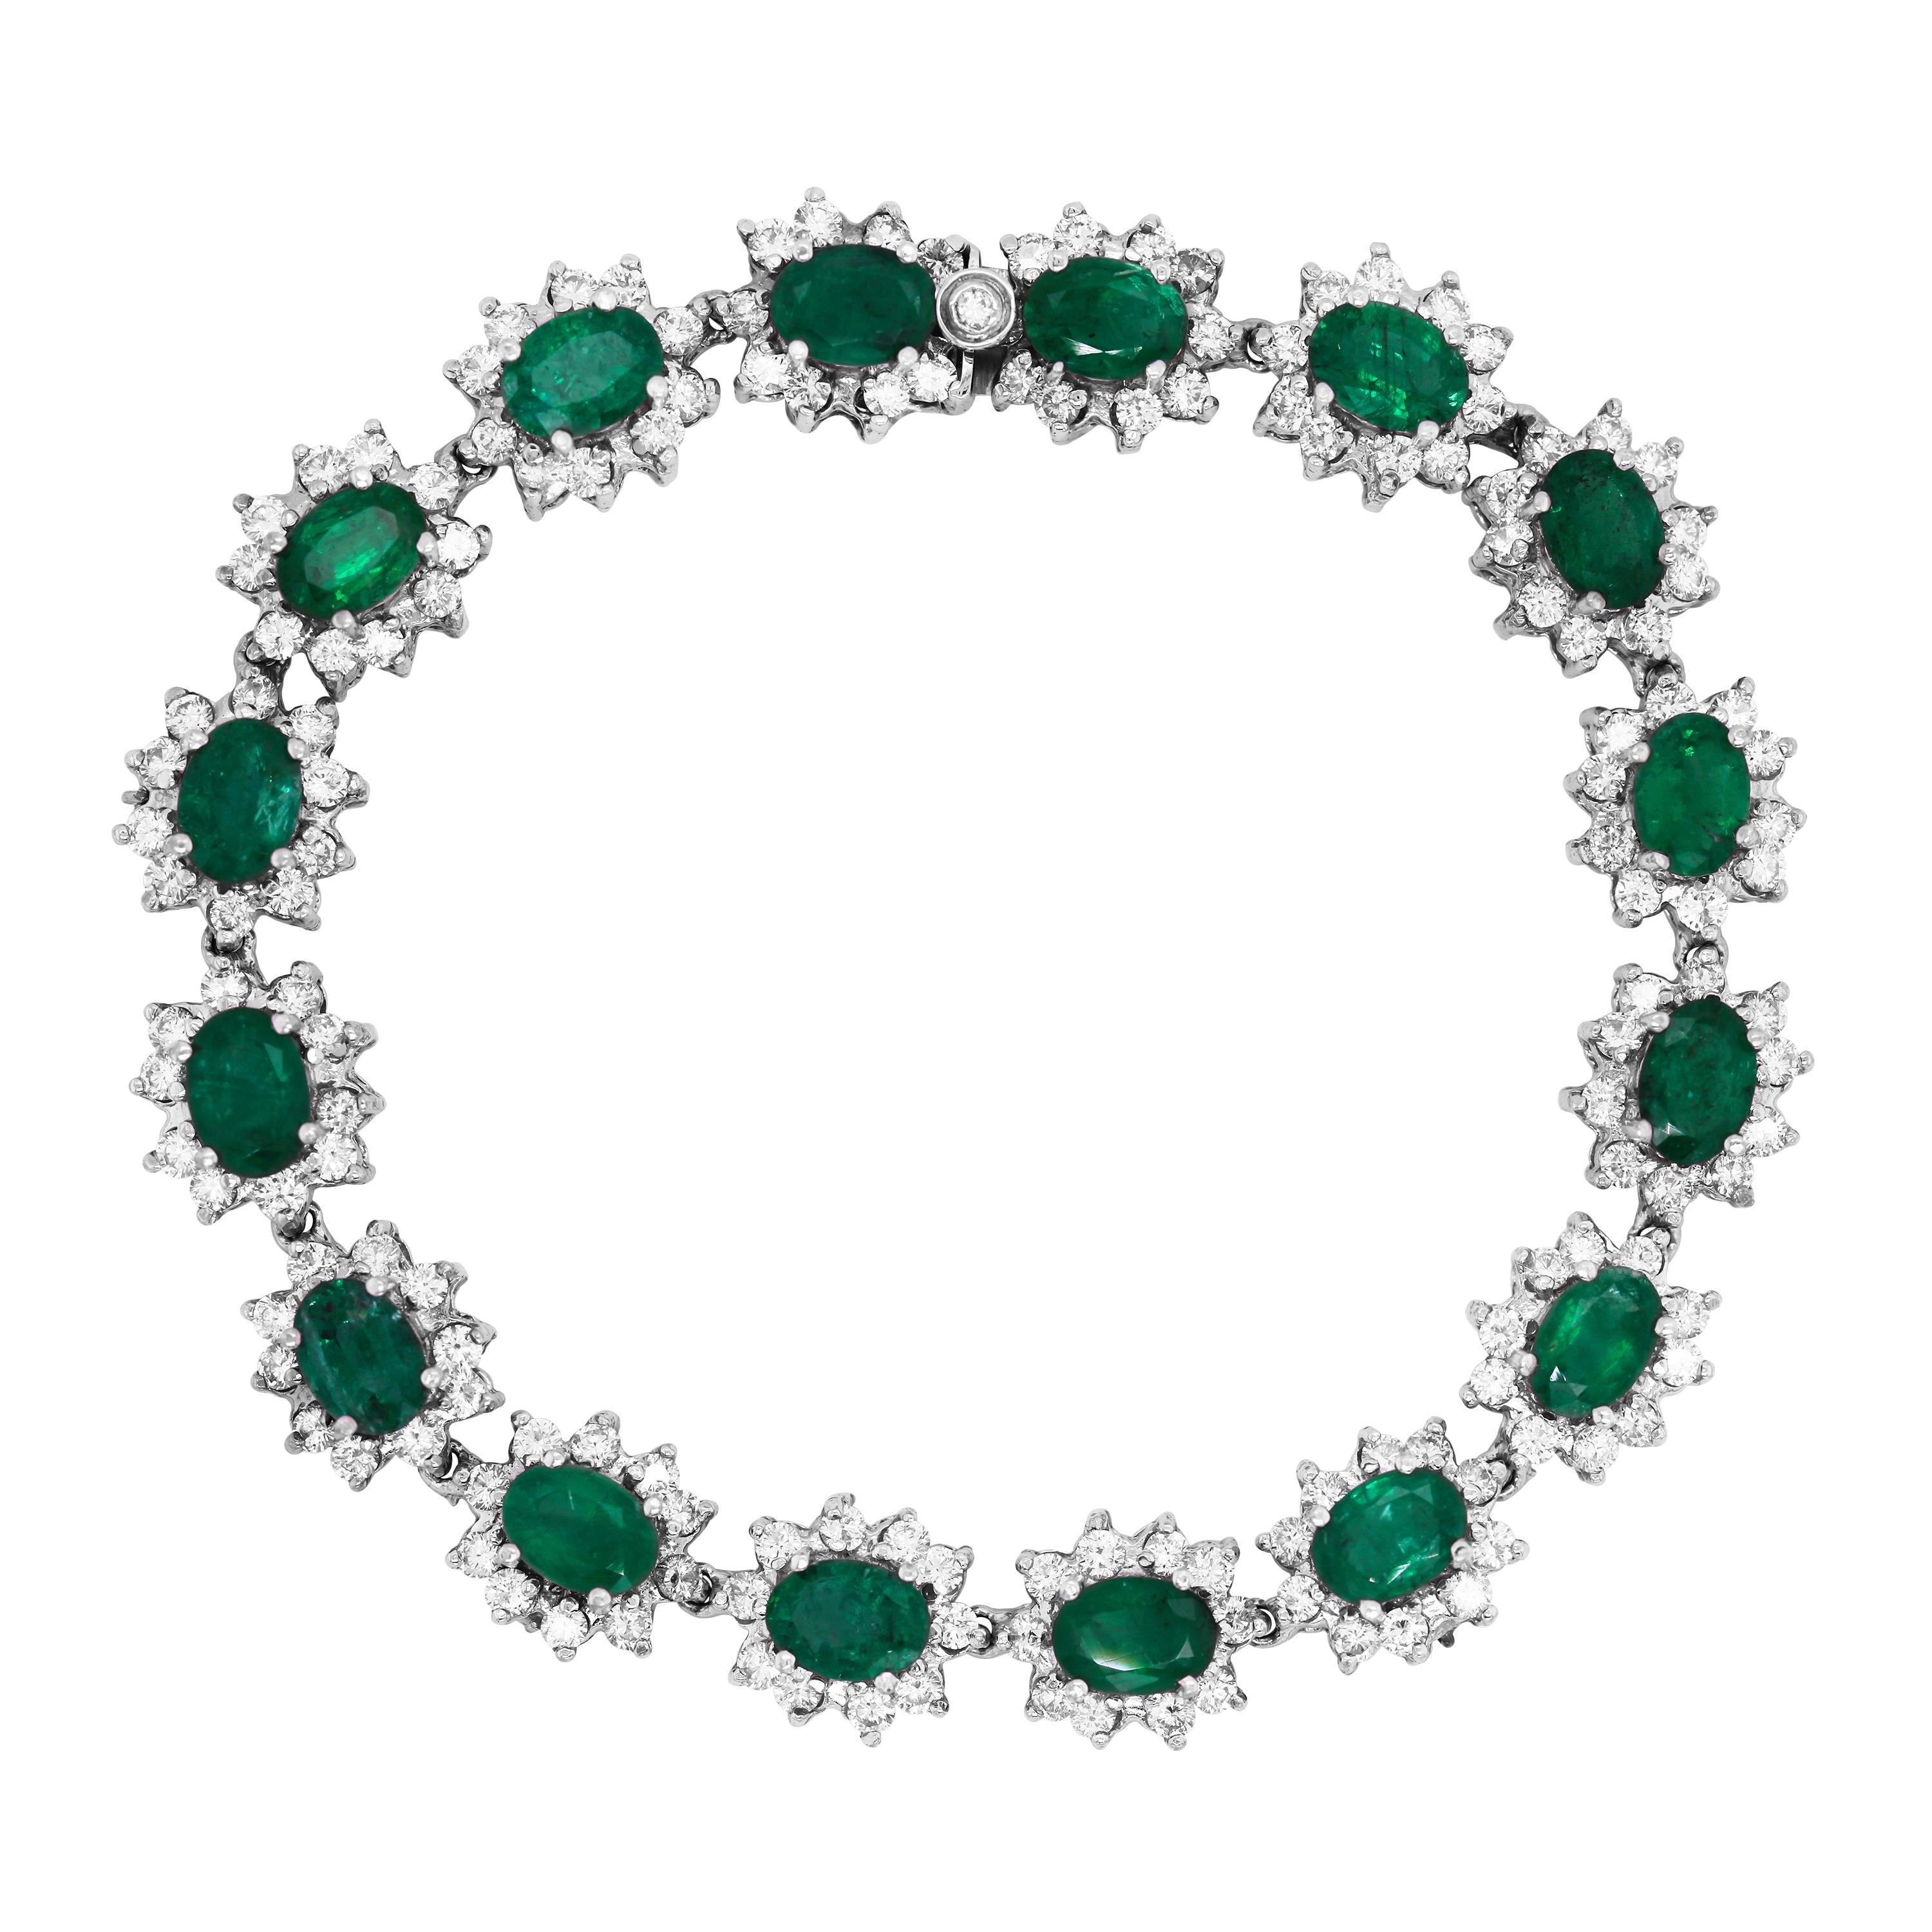 14k White Gold and Diamond Bracelet with Oval Cut Zambian Emeralds

This bracelet features 16 oval Zambian Emeralds surrounded with diamonds in each section

Apprx. 12.50 carat Emeralds. The Emeralds origin are from Zambia

Apprx. 5 carat G color,